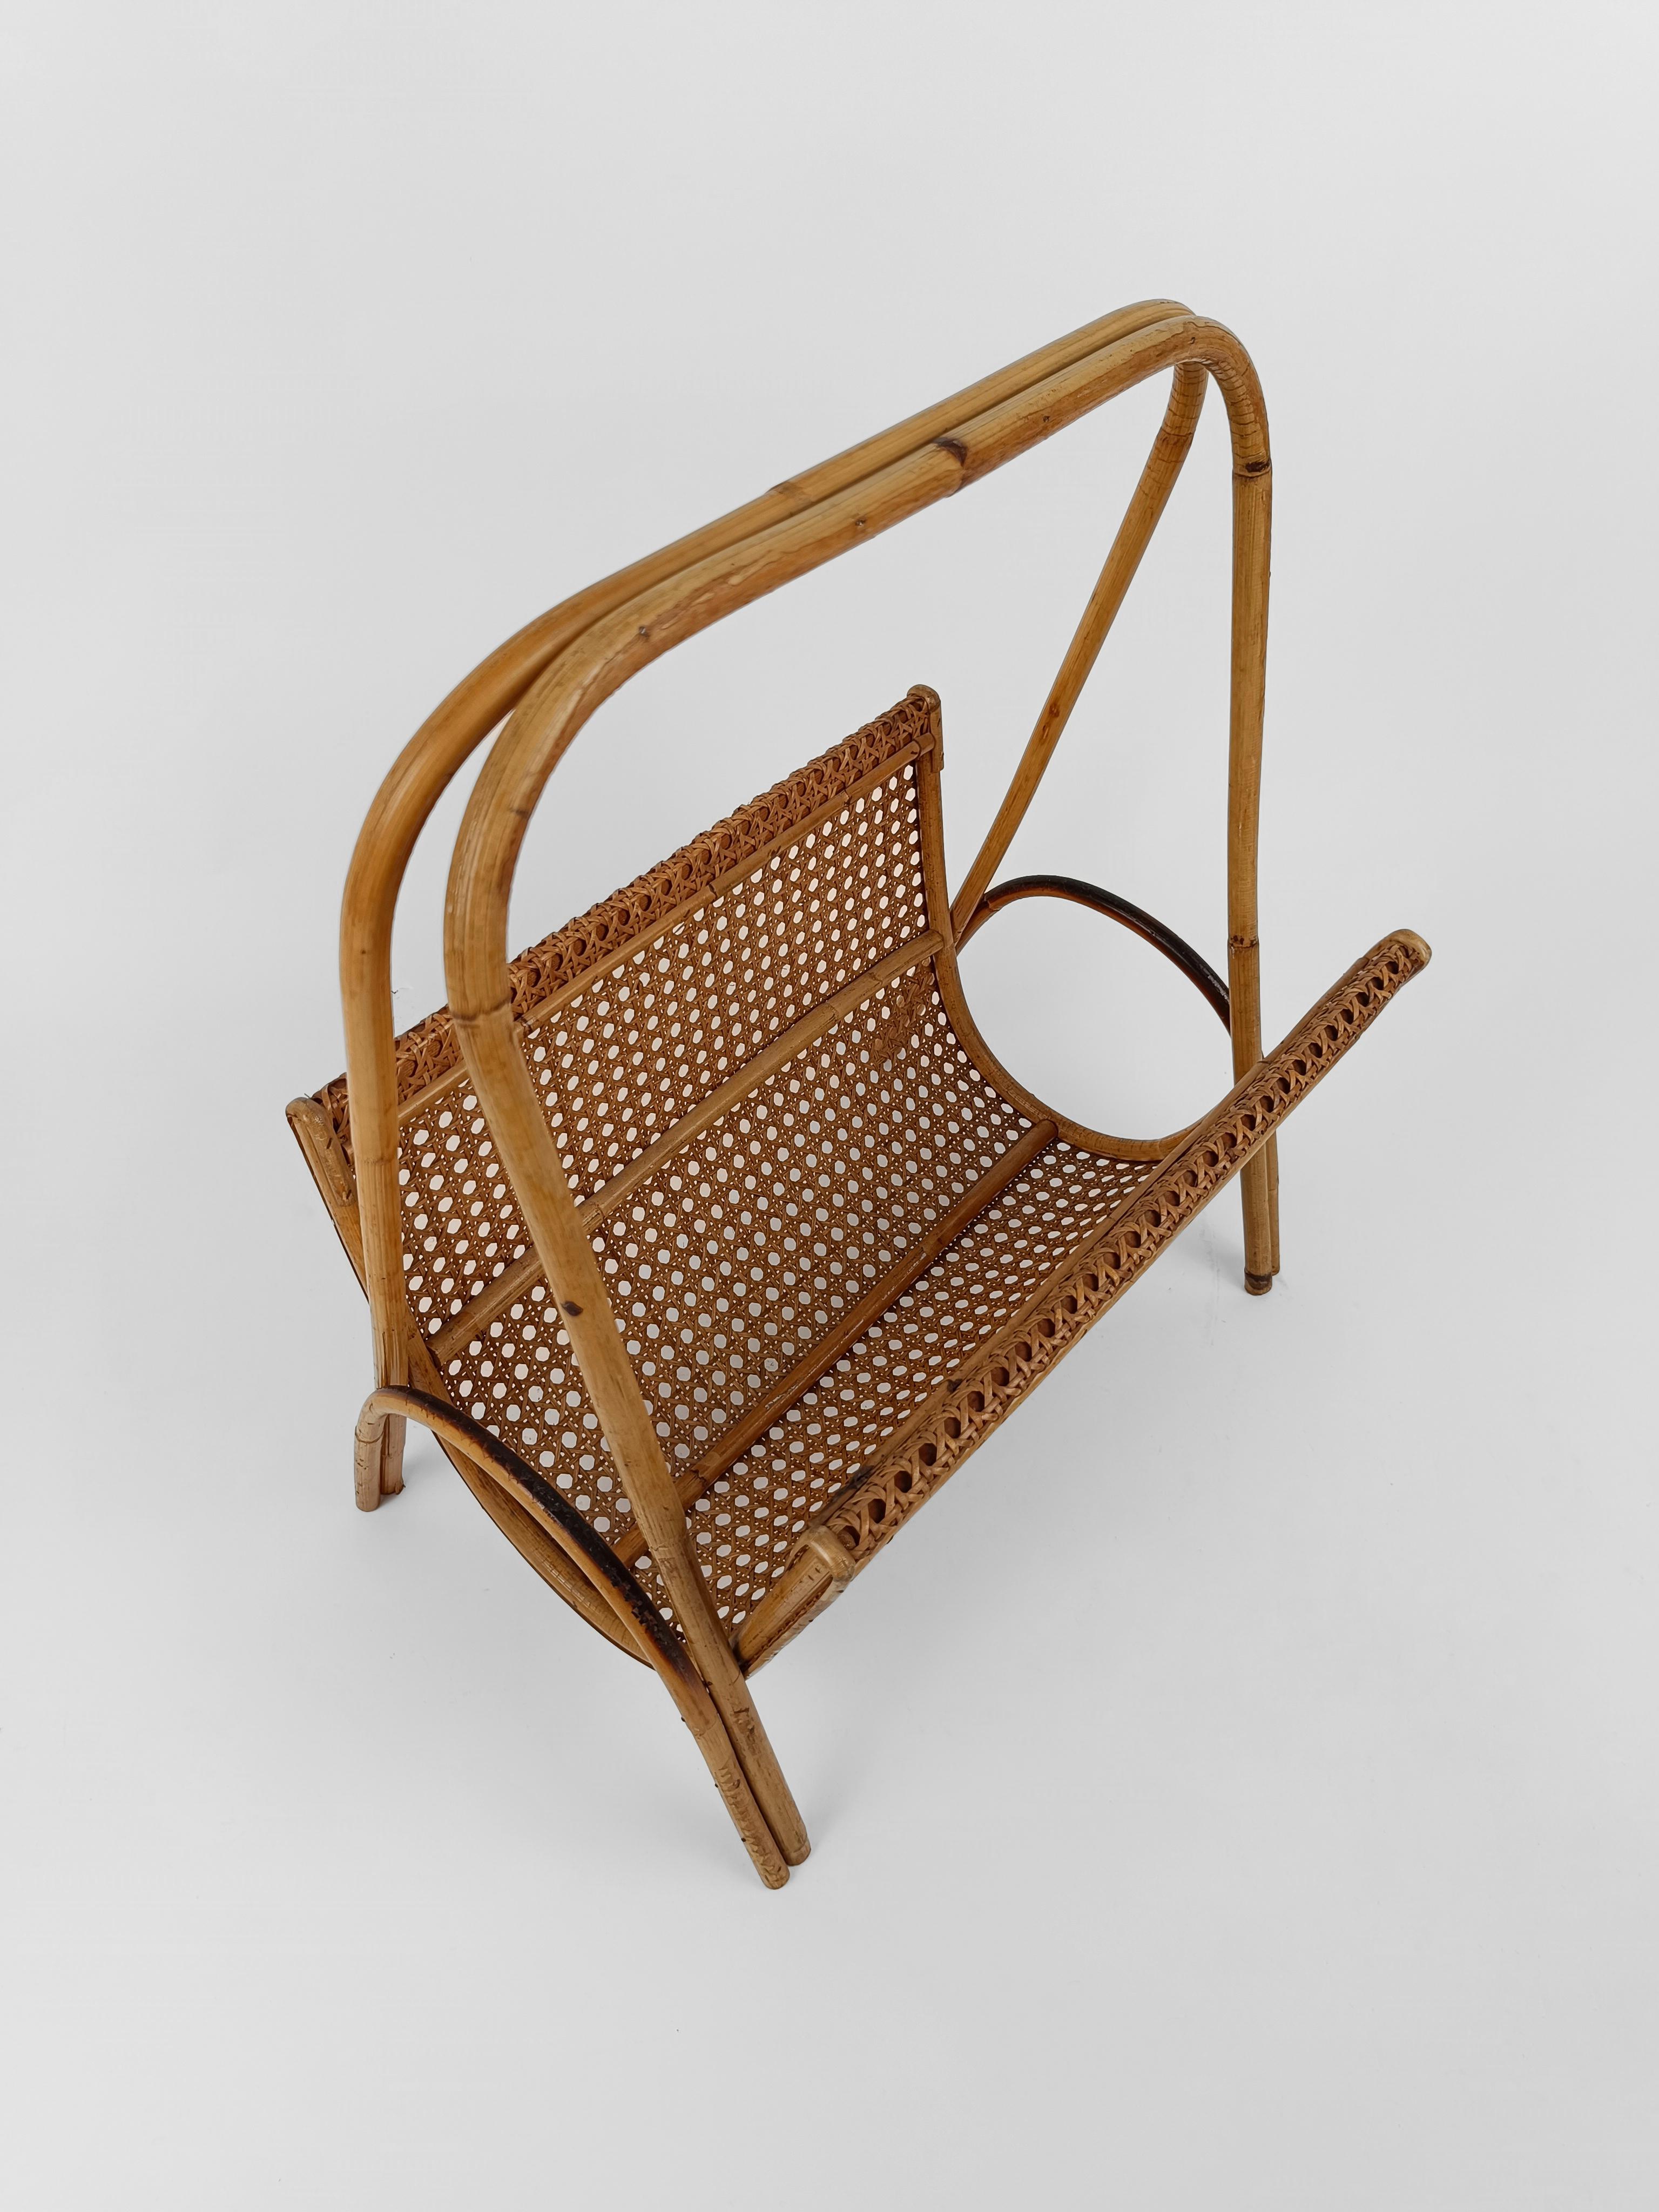 Vintage Magazine Rack in Wicker, Bamboo, Rattan and Cane, Italy 1960s  For Sale 3